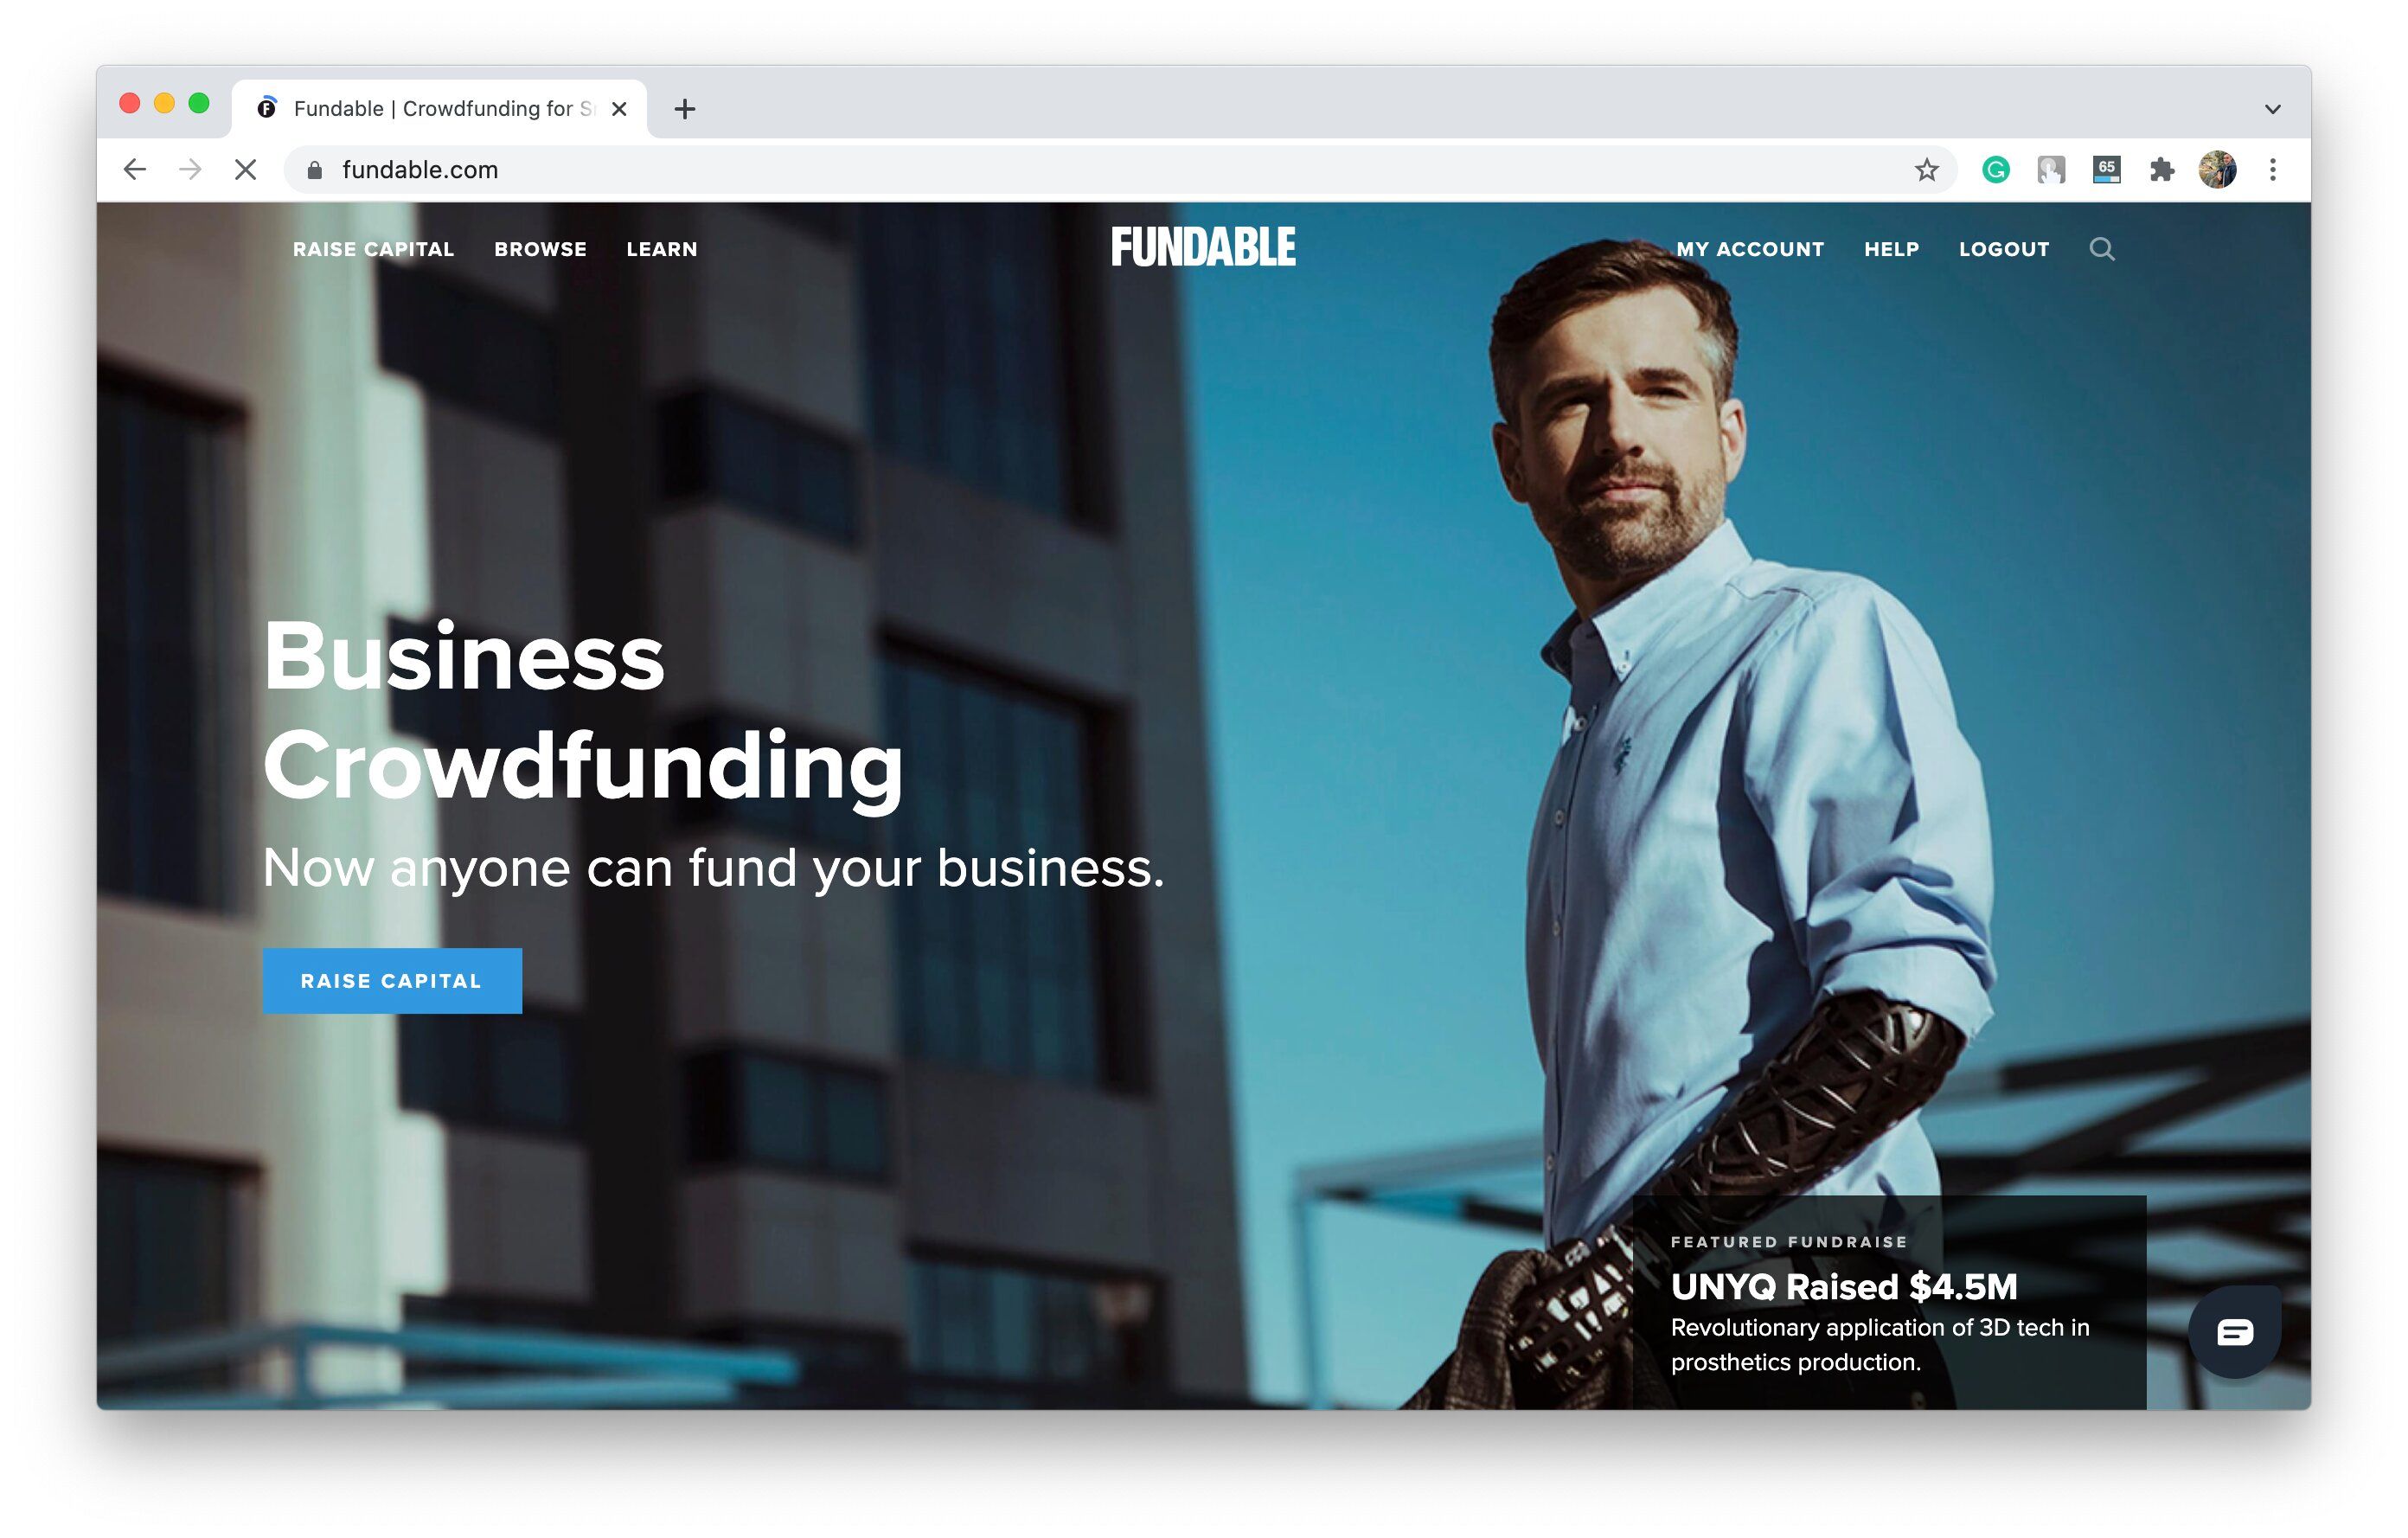 If you want to create a donation-based crowdfunding site, consider allowing marketing campaign creators to offer special bonuses so investors get something in return (*image by [Fundable](https://www.fundable.com/){ rel="nofollow" target="_blank" .default-md}*)